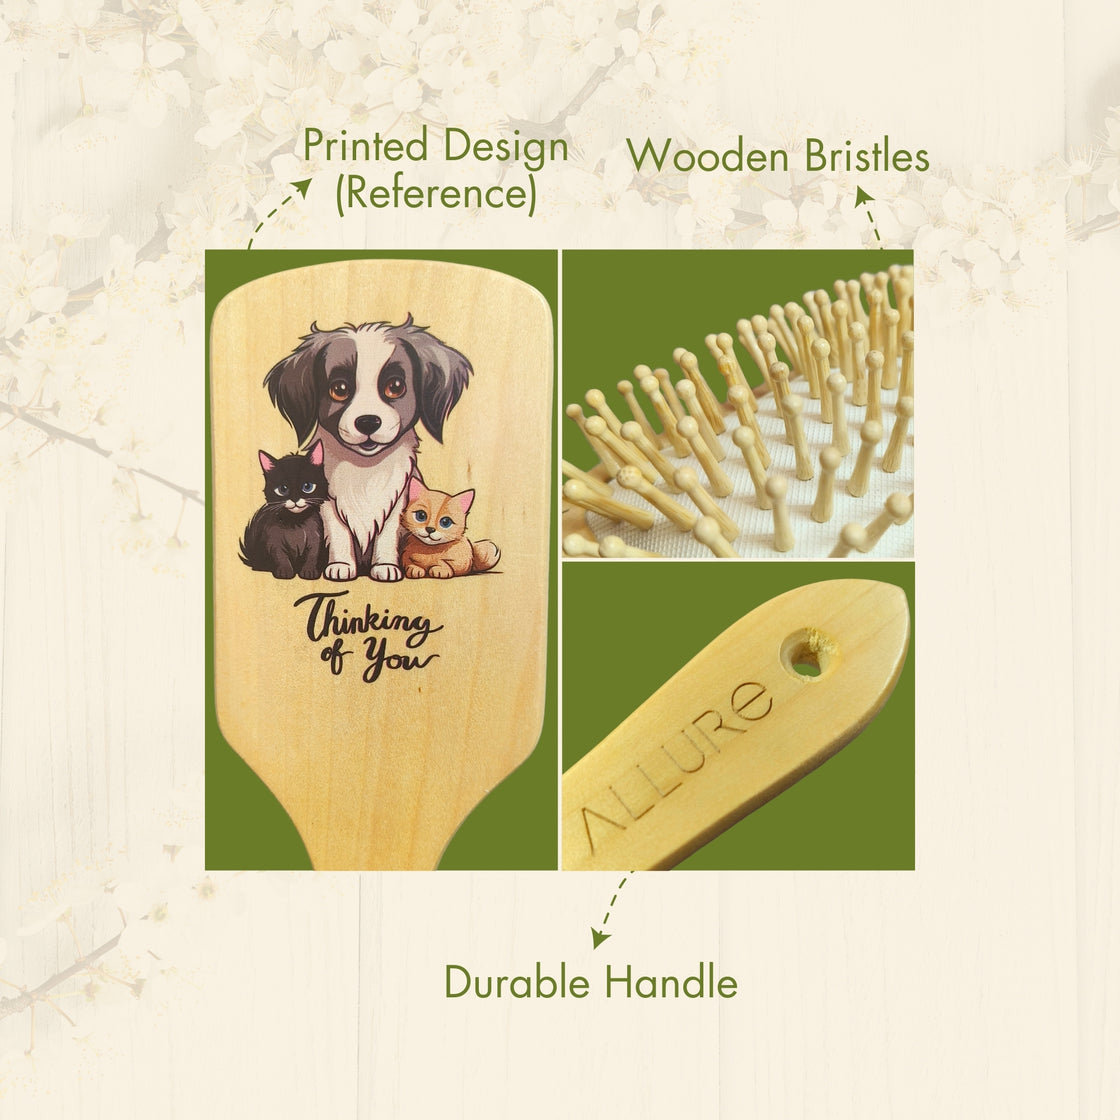 Allure Personalised wooden paddle hair brush with unicorn print